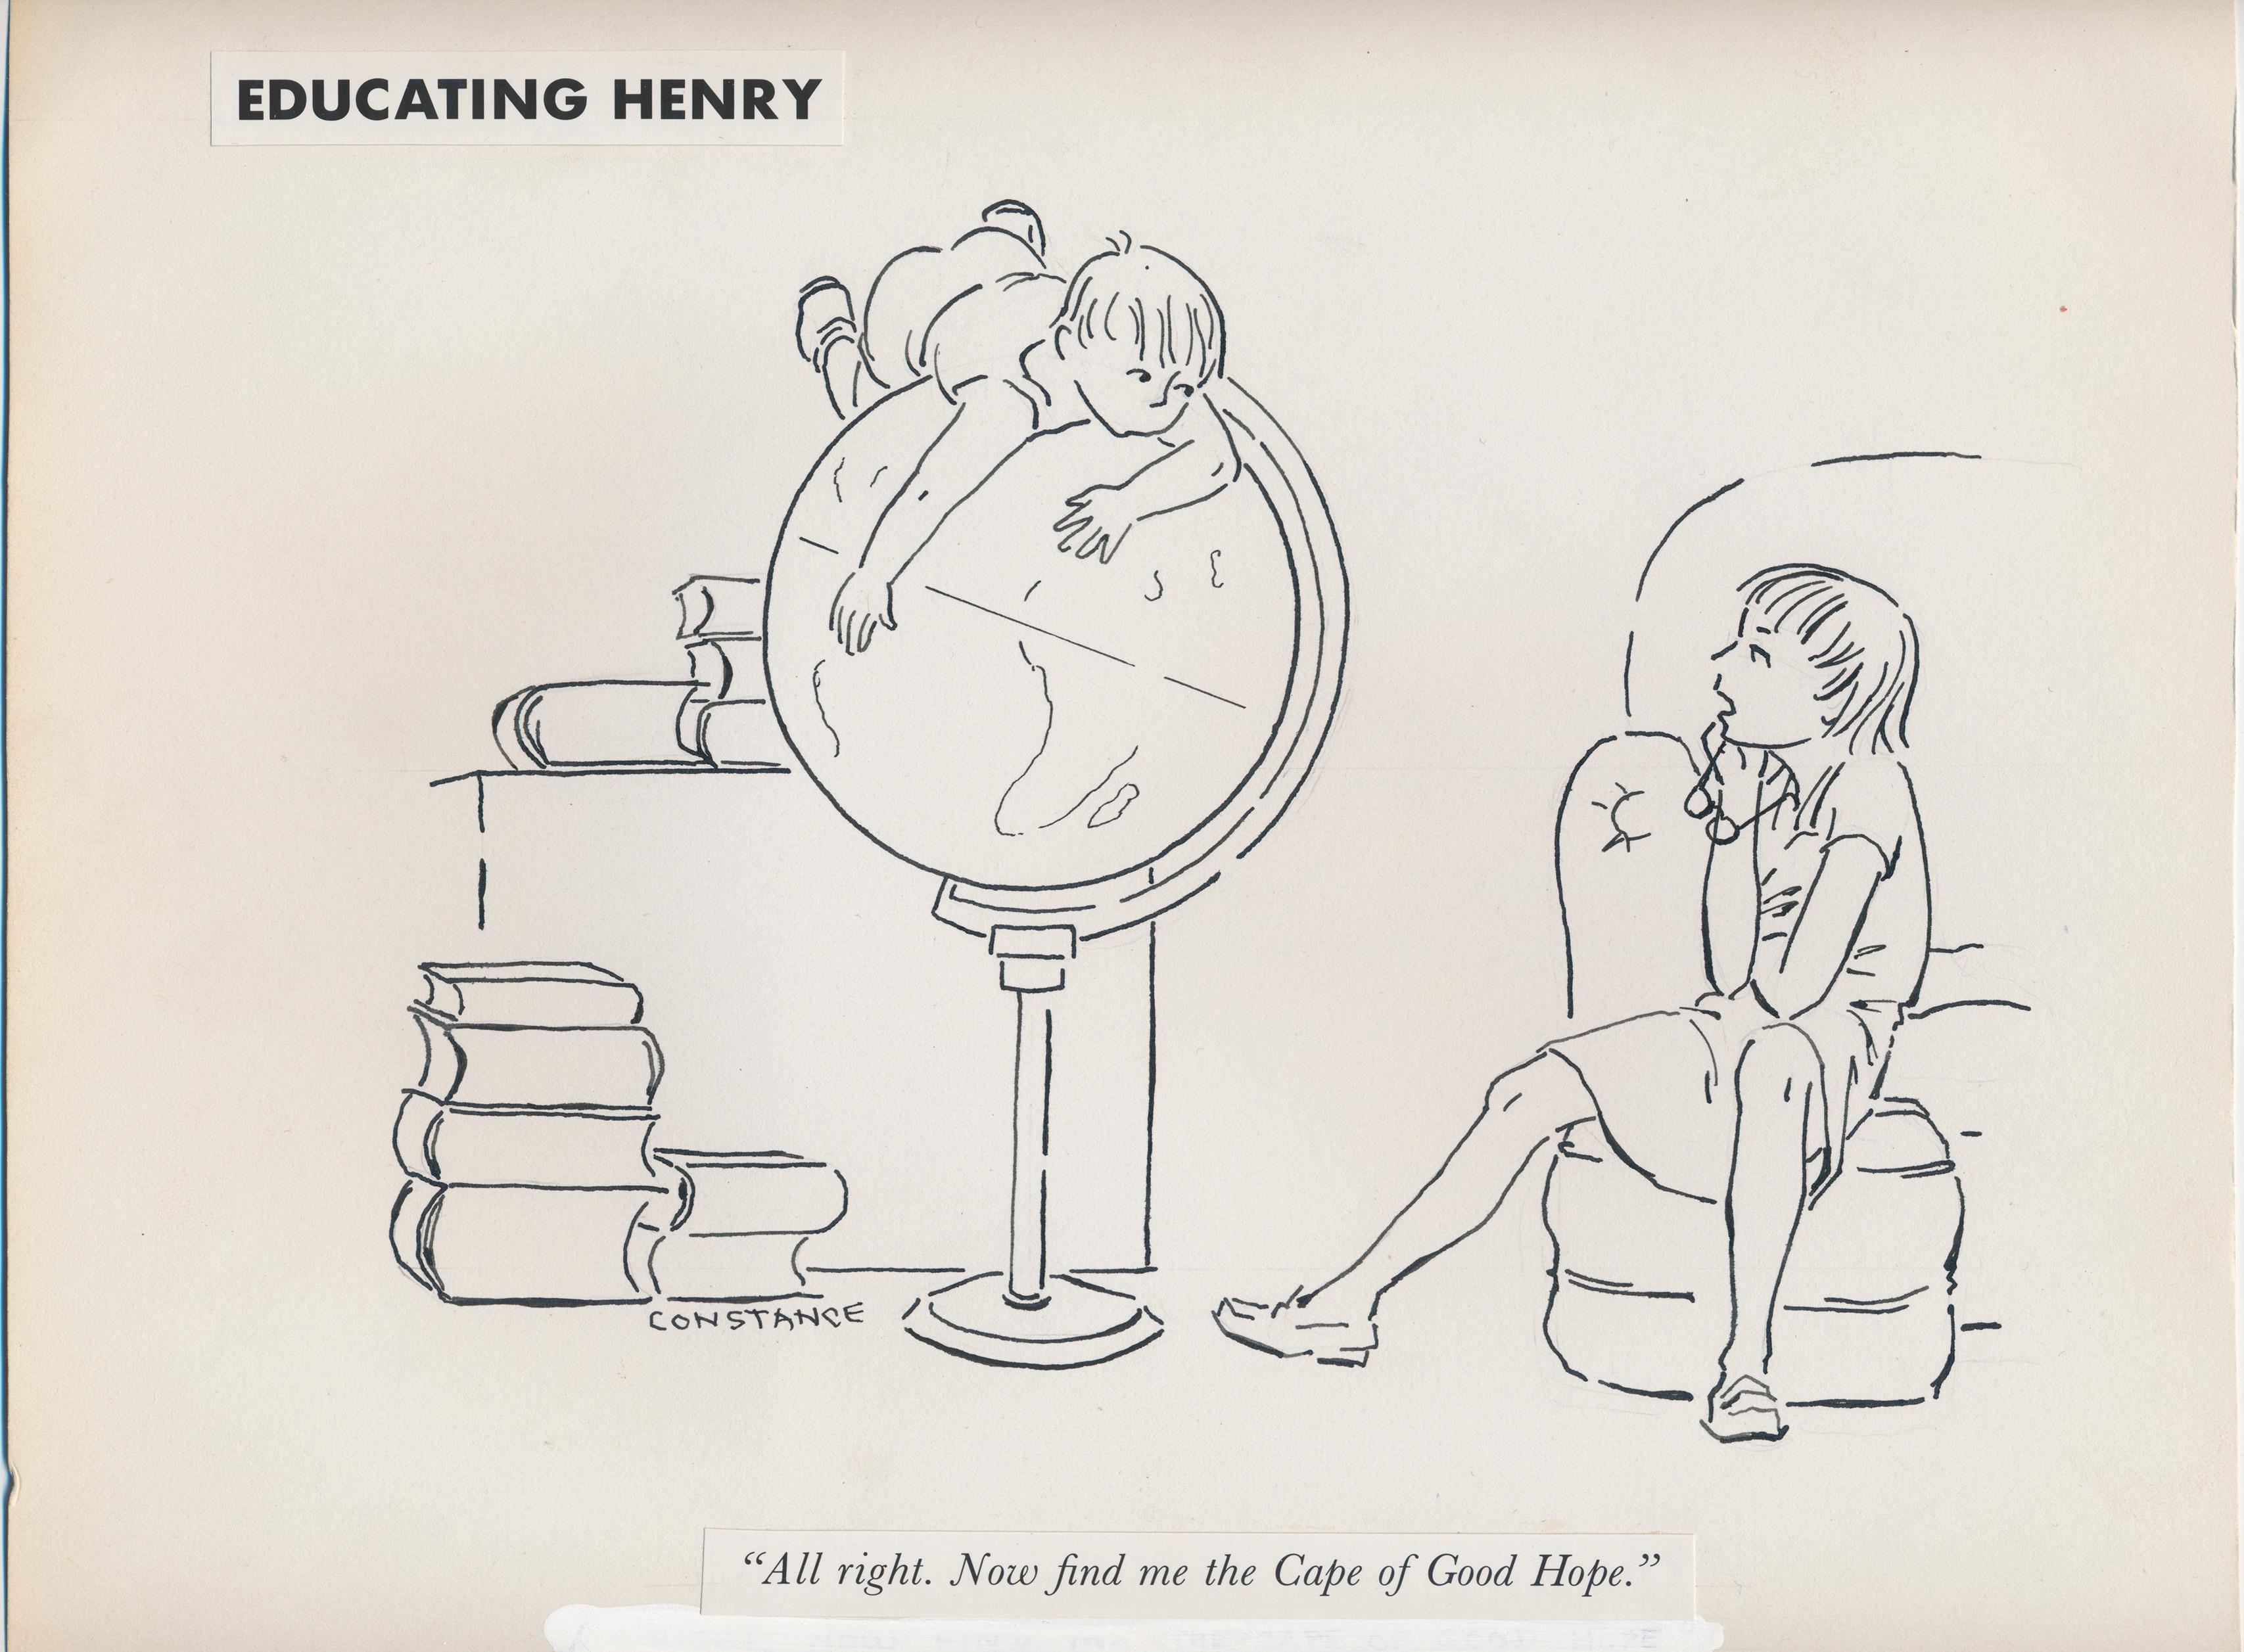 Connie Converse Documentary on "Next from "Educating Henry" cartoon series by Converse https://t.co/Bsux6RWbRF" Twitter